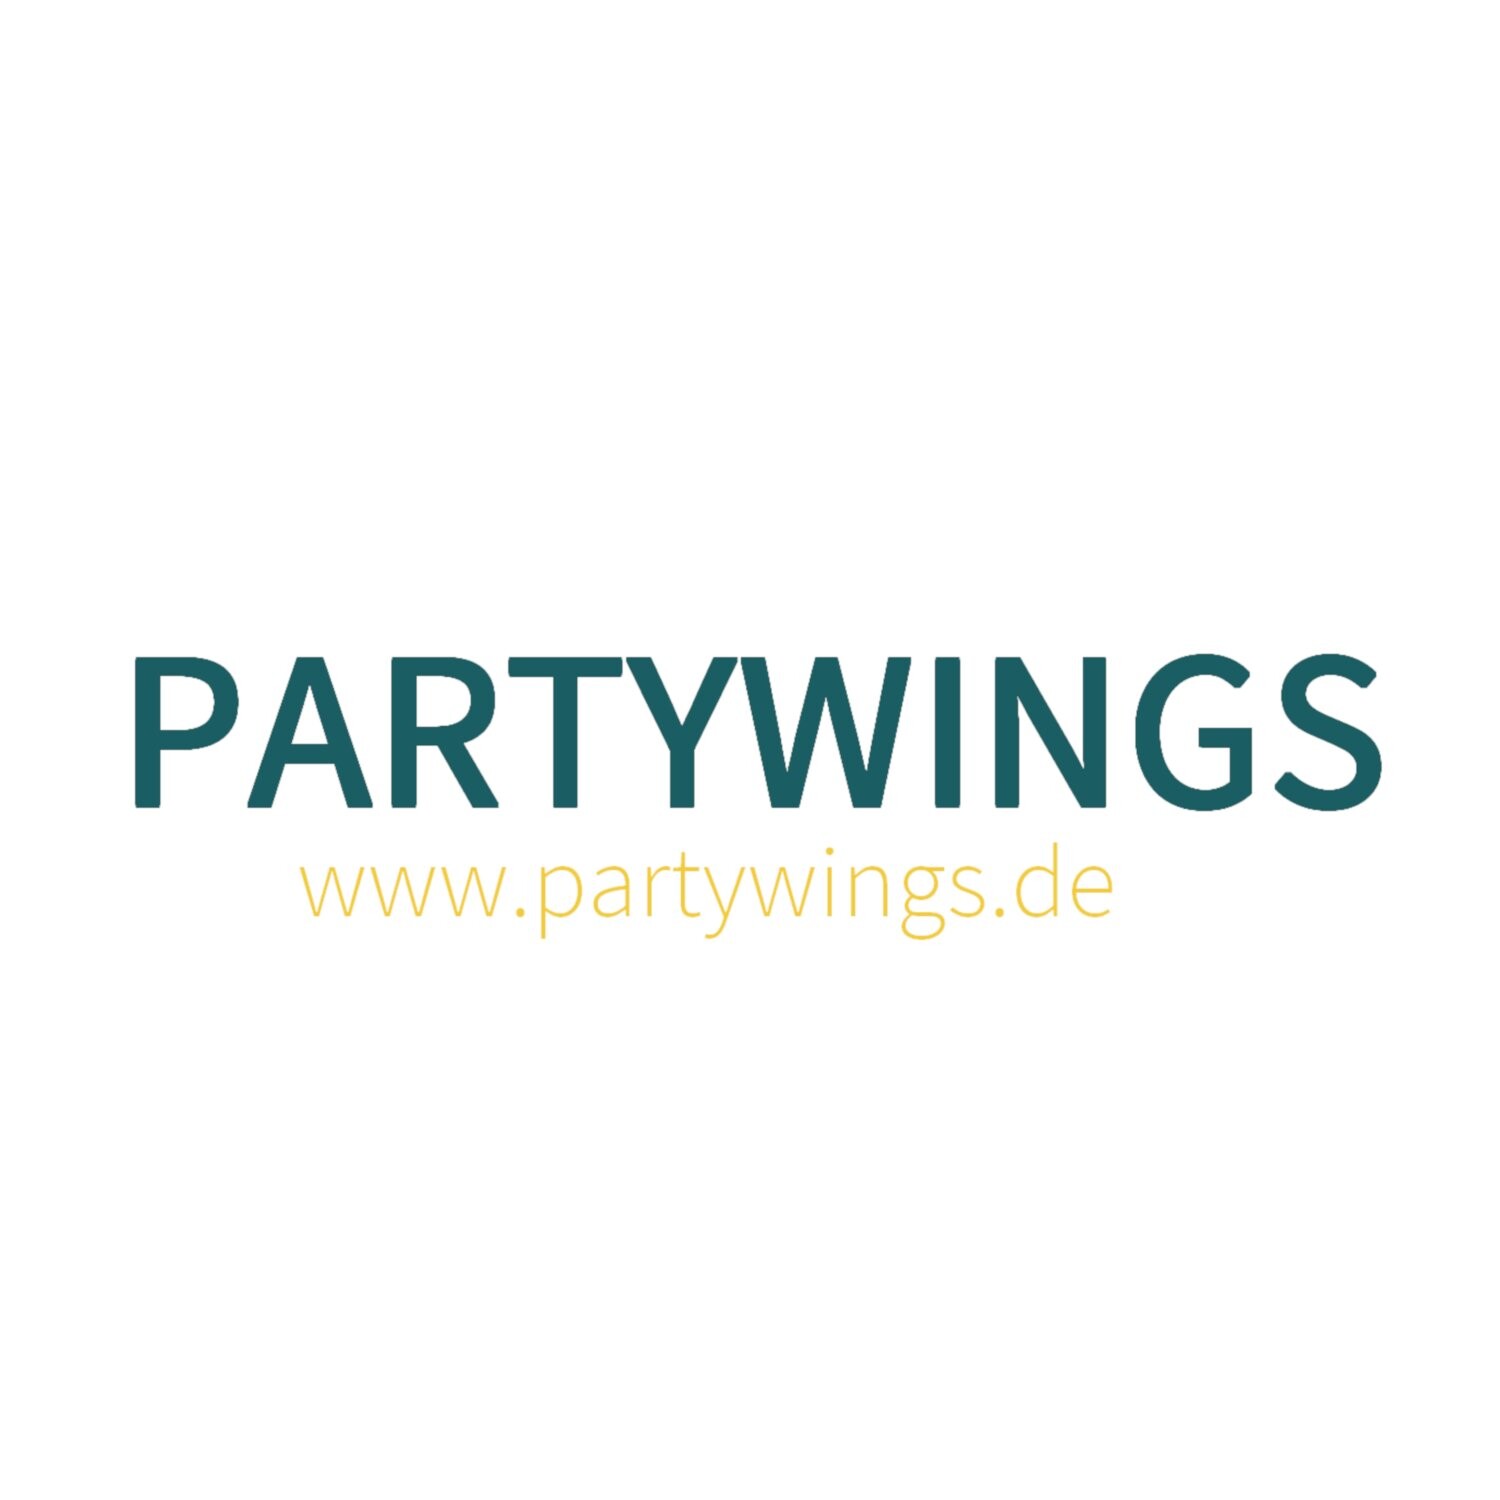 PARTYWINGS